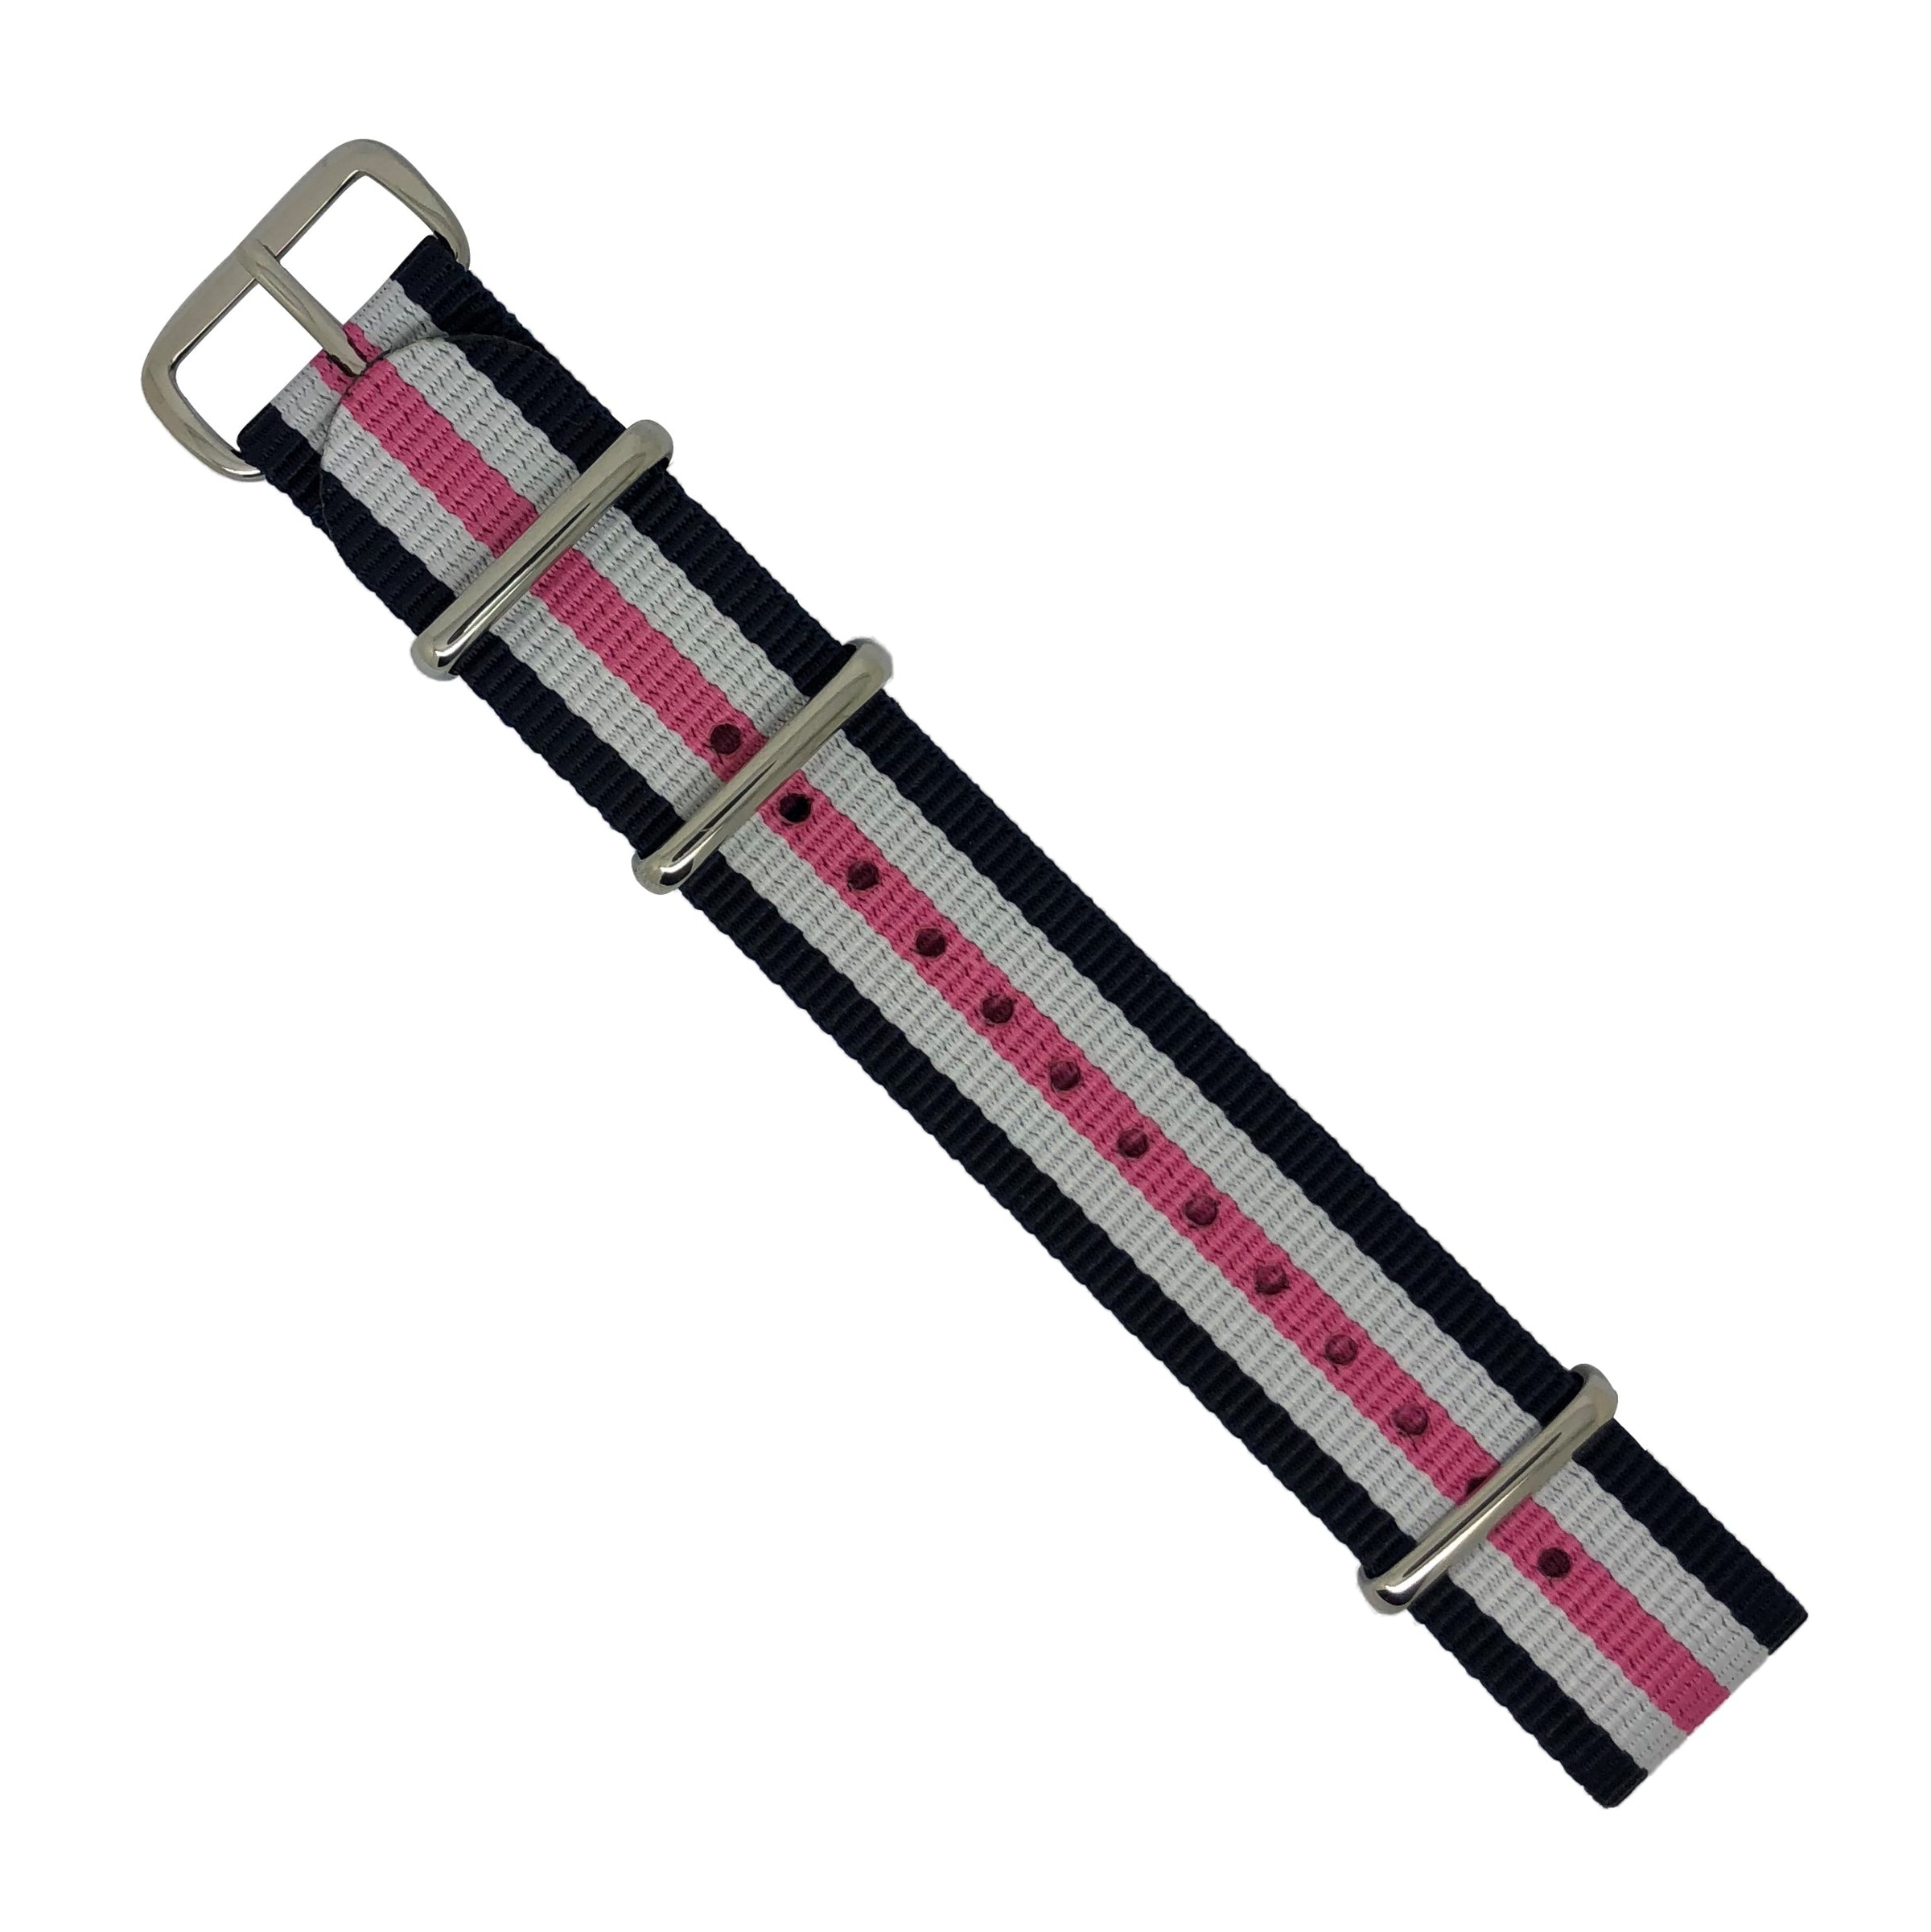 Premium Nato Strap in Regimental Pink with Polished Silver Buckle (20mm) - Nomad watch Works